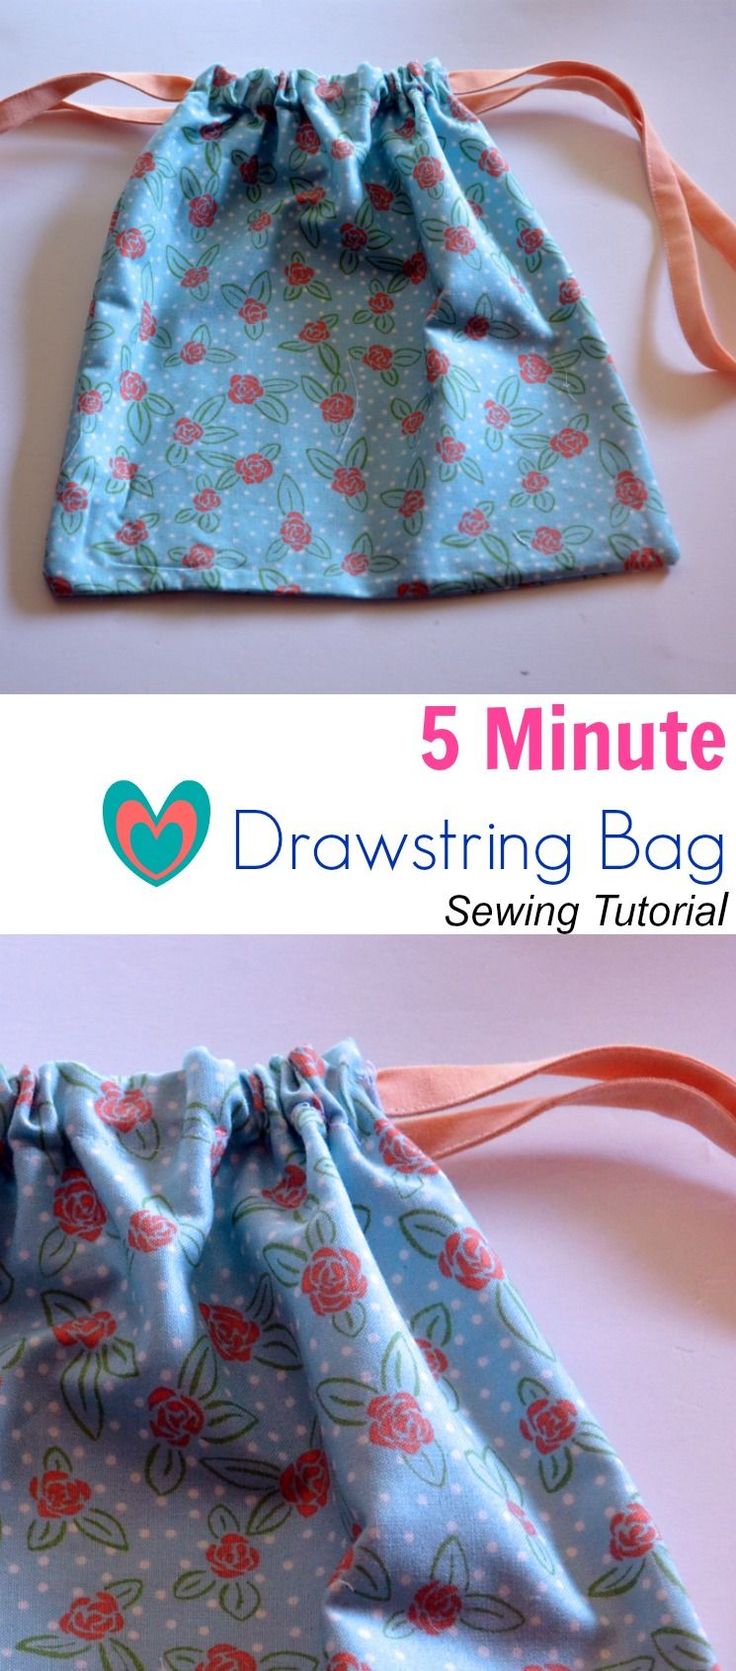 5 Minute Drawstring Bag Sewing Tutorial: Learn how to make this quick and easy s...